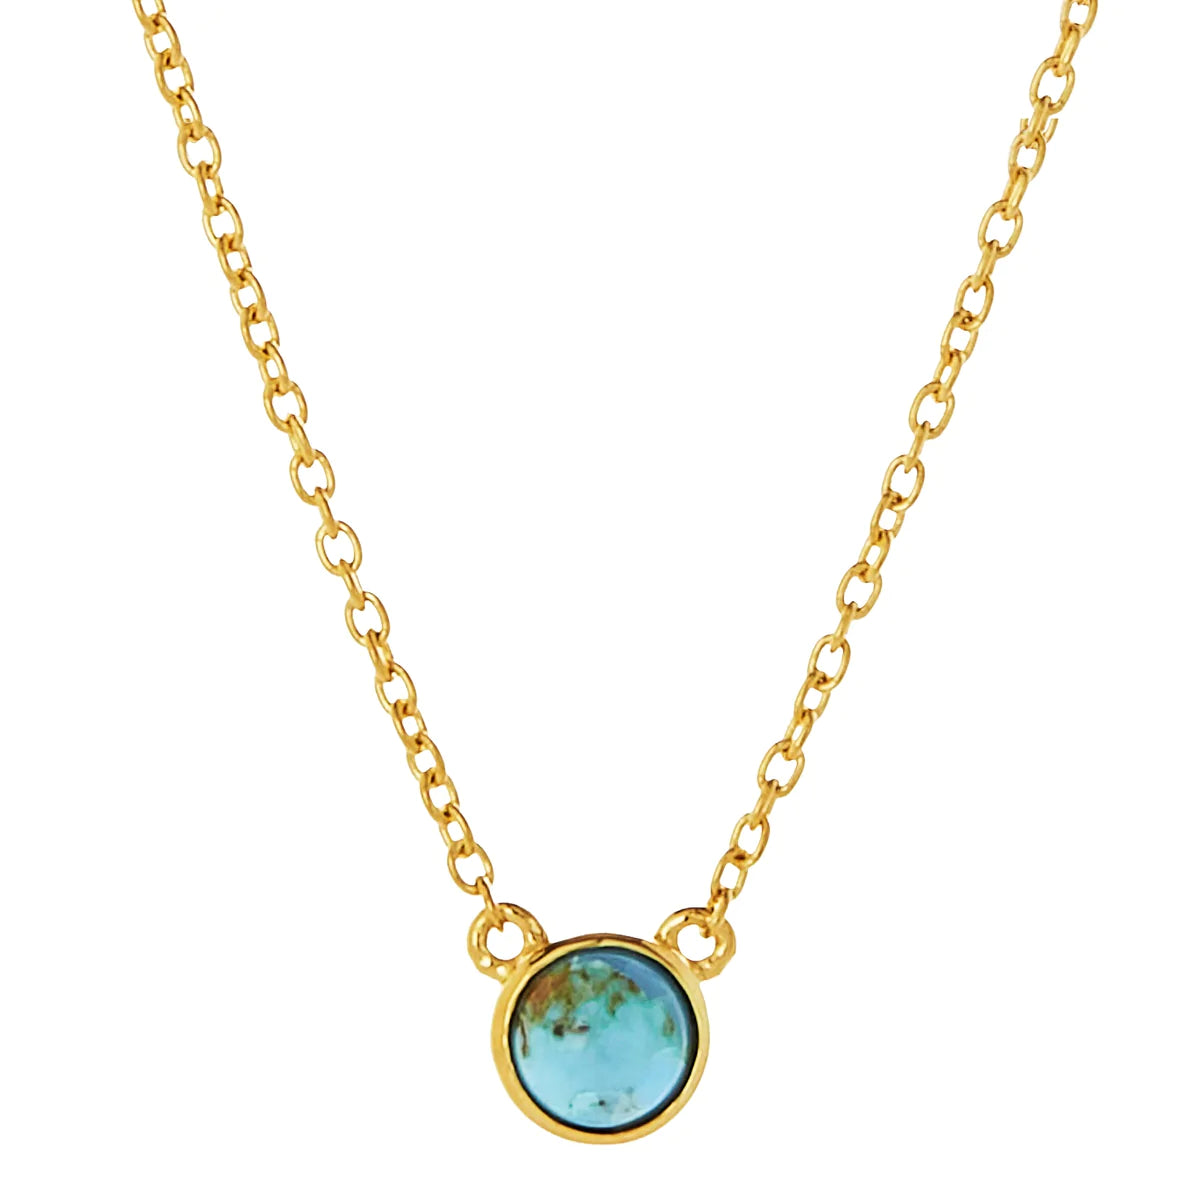 Najo - 5mm Yellow Gold Necklace